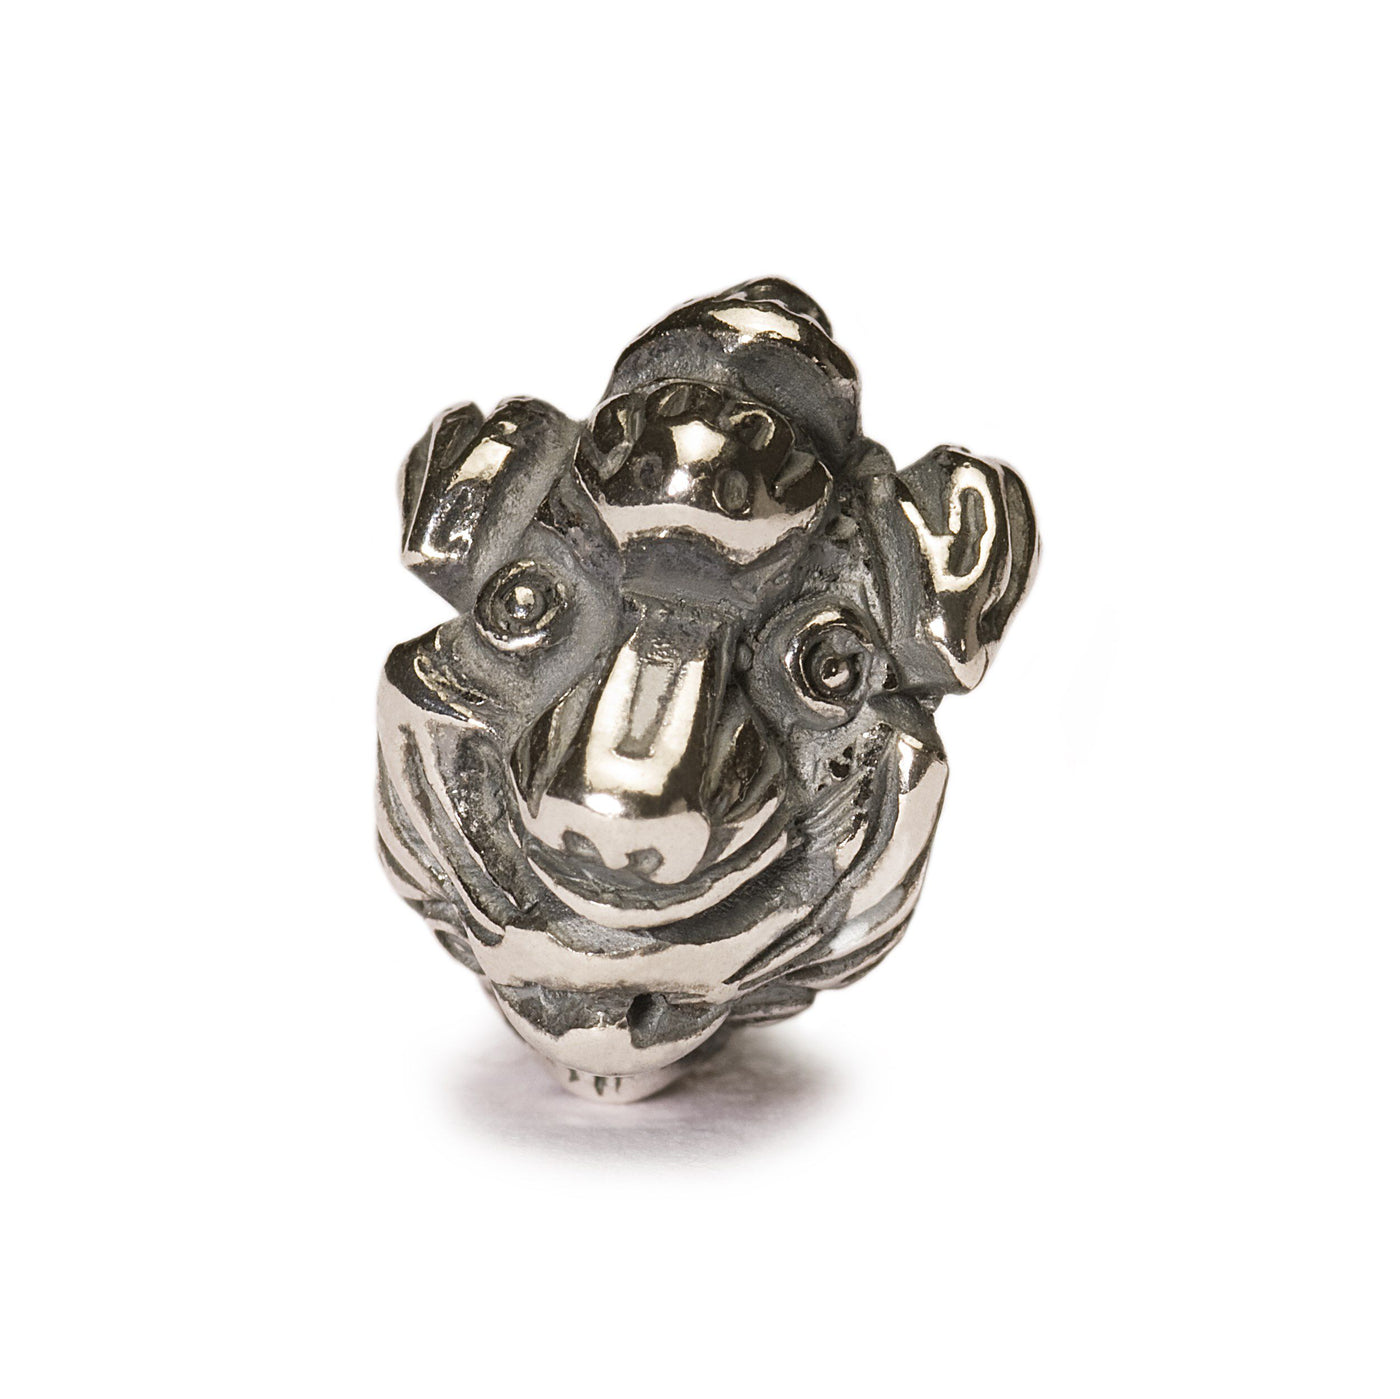 Find-your-pet - Trollbeads Canada